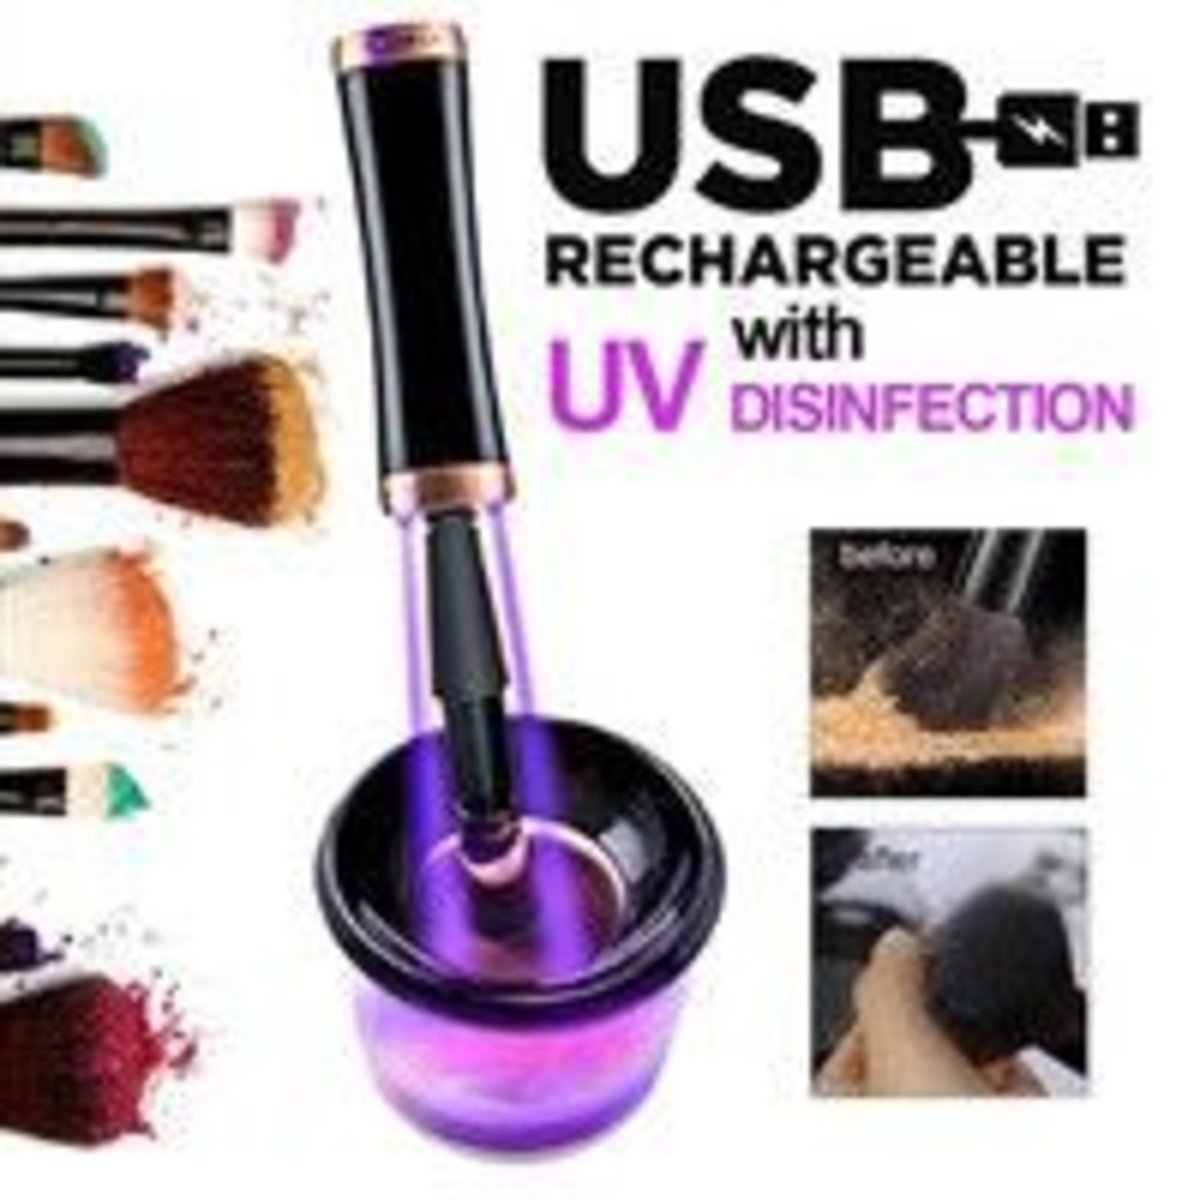 Micro Sun - makeup brush disinfection cleaner (USB charged)